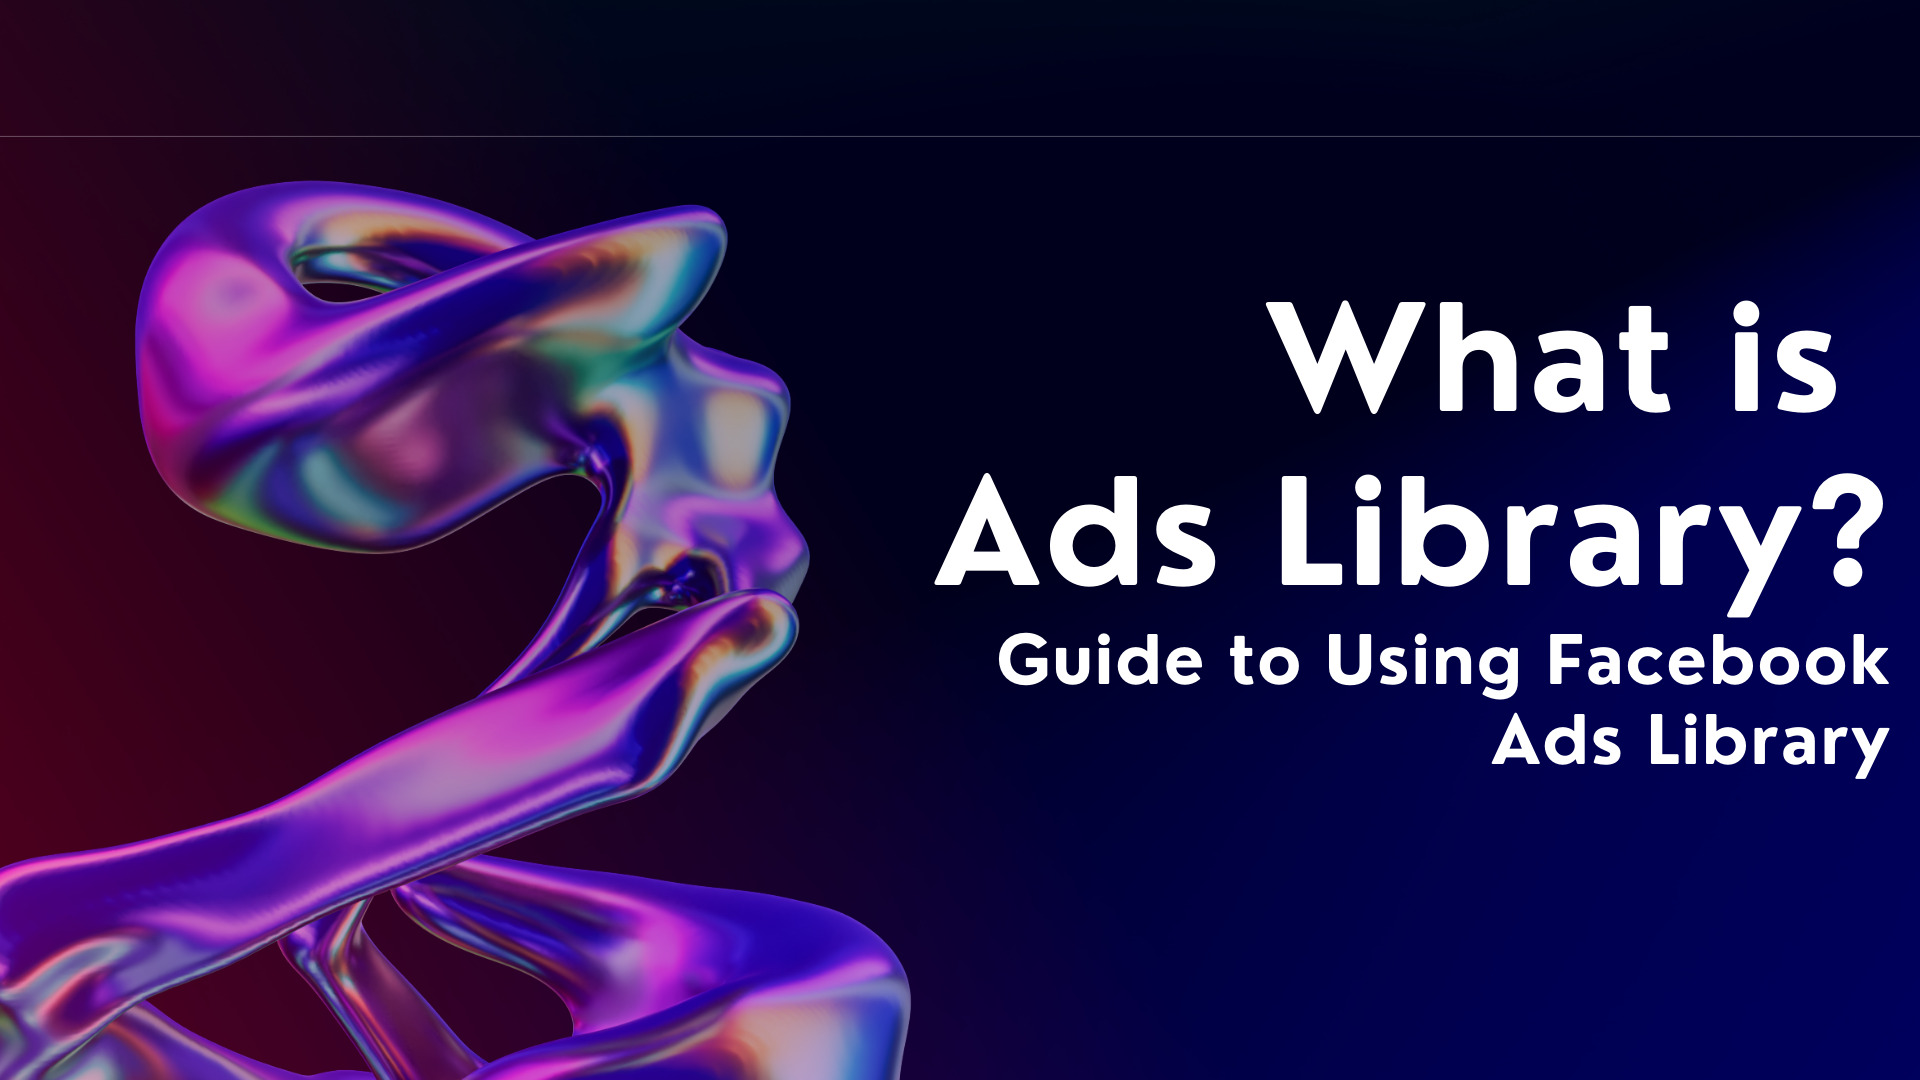 What is Ads Library? Guide to Using Facebook Ads Library